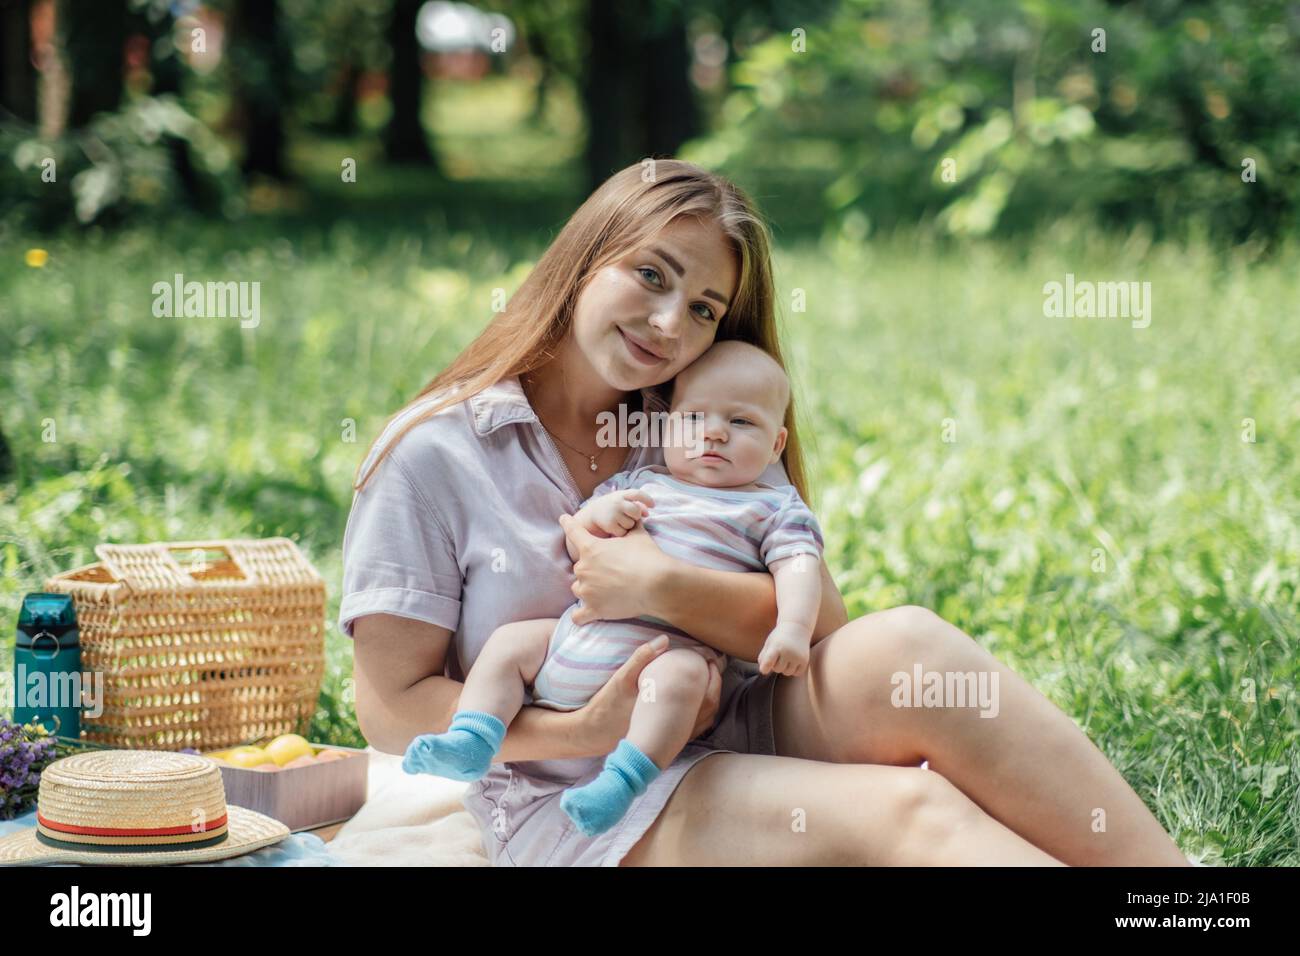 Mental Health in Postpartum Time. Maternal Mental Health. How to avoid pregnancy And Postpartum Disorders, postpartum baby blues, depression. Portrait Stock Photo